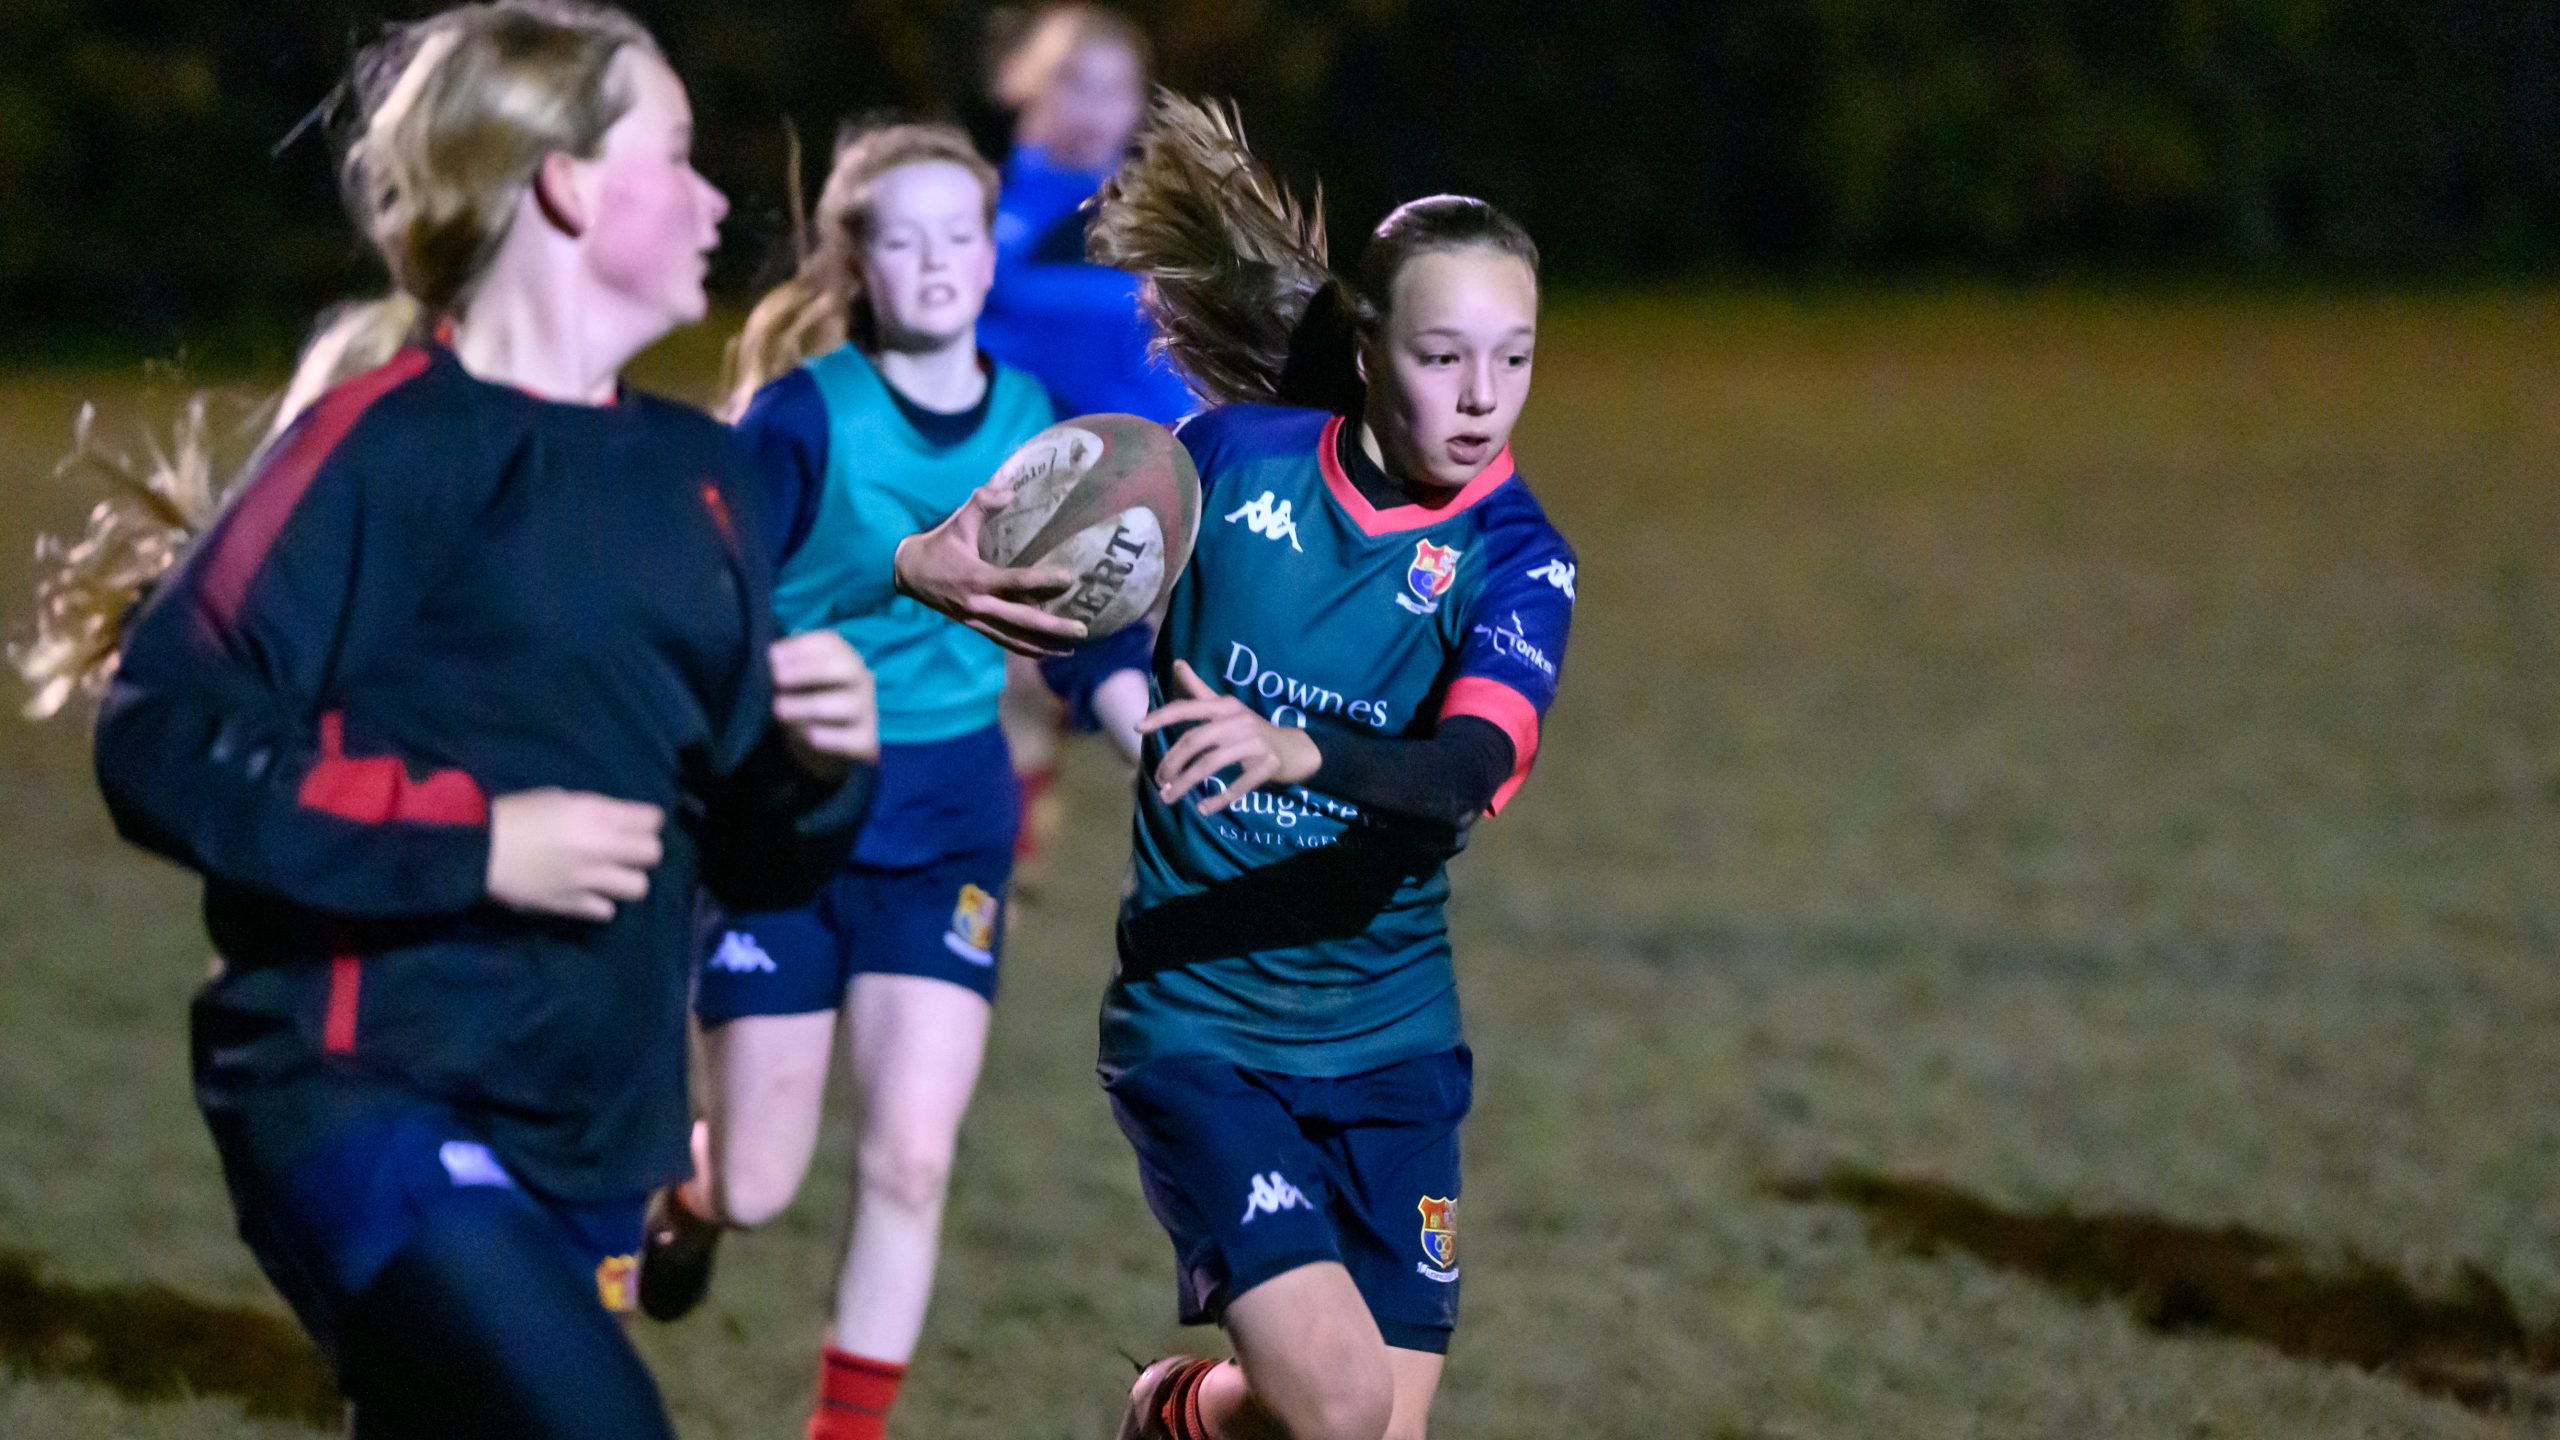 Girls playing rugby